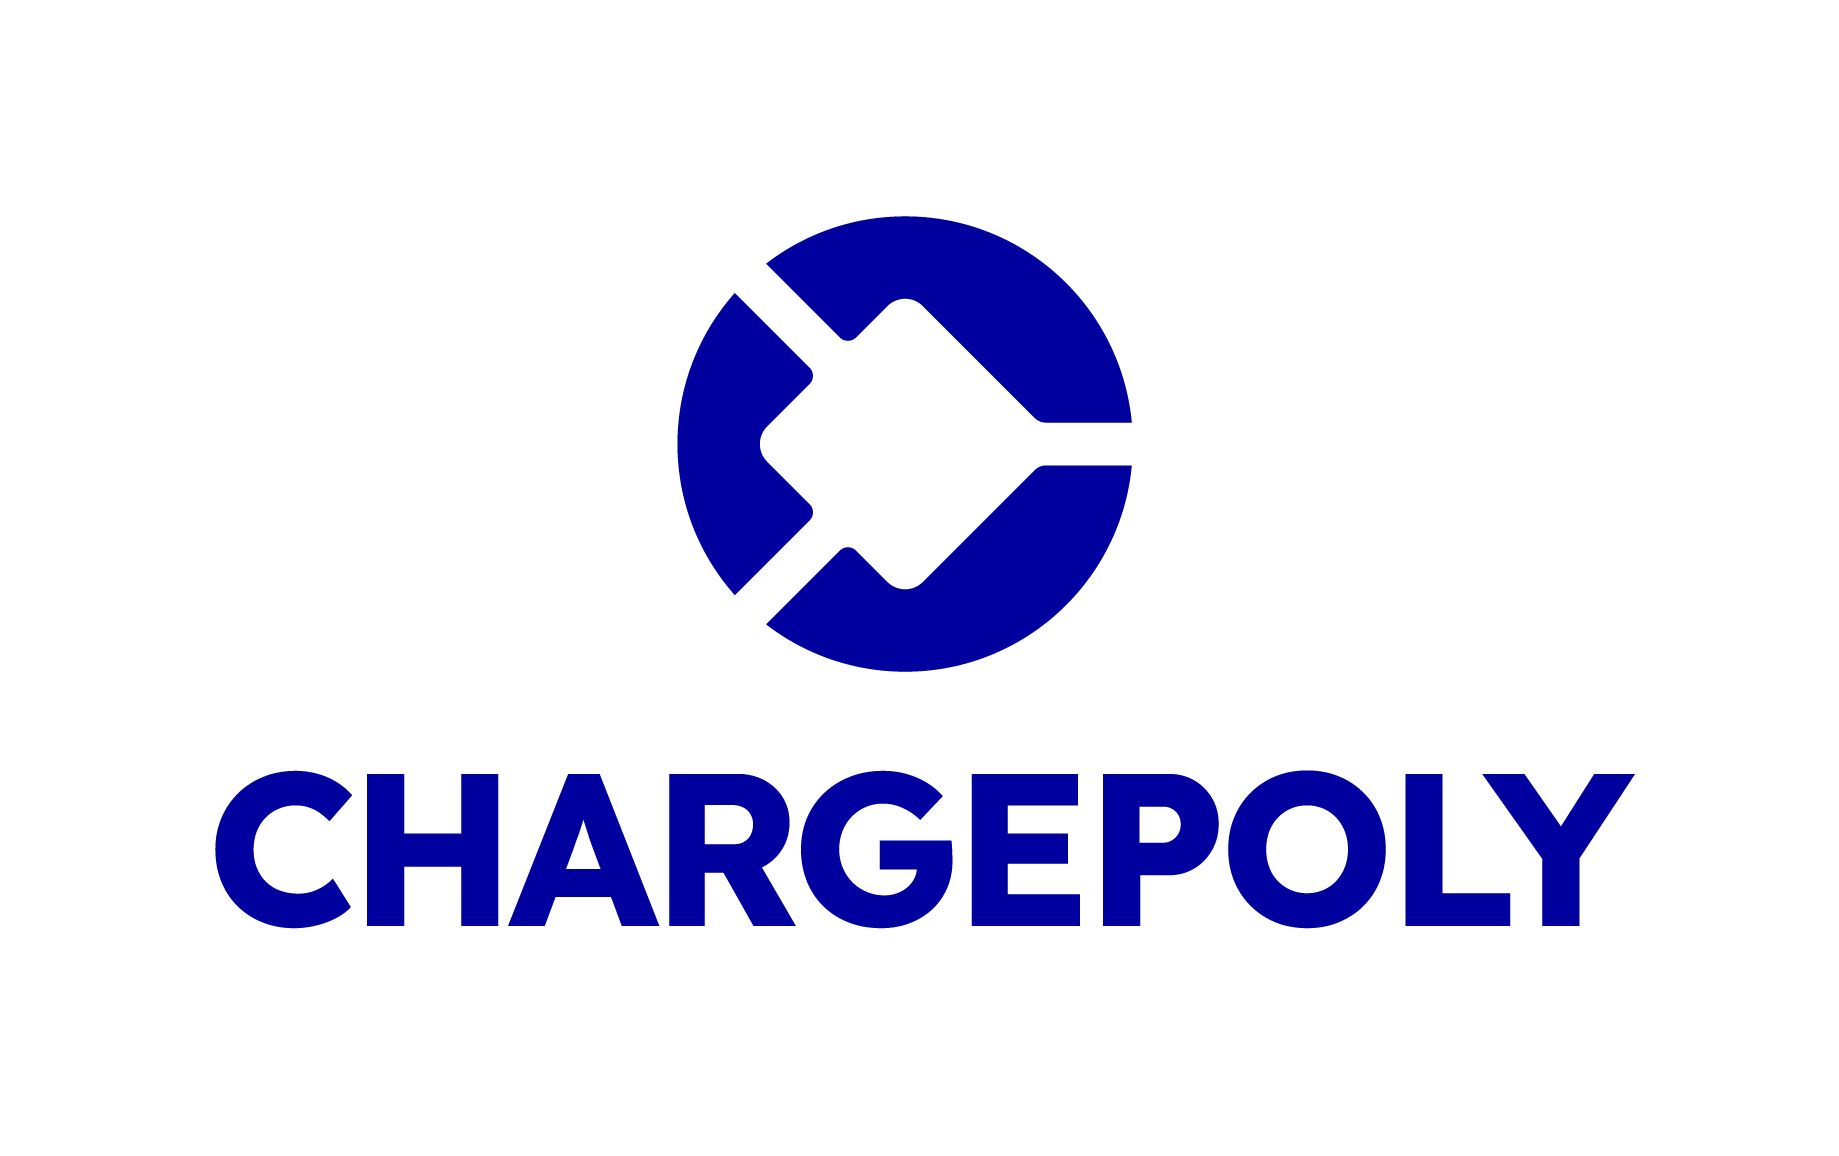 Chargepoly